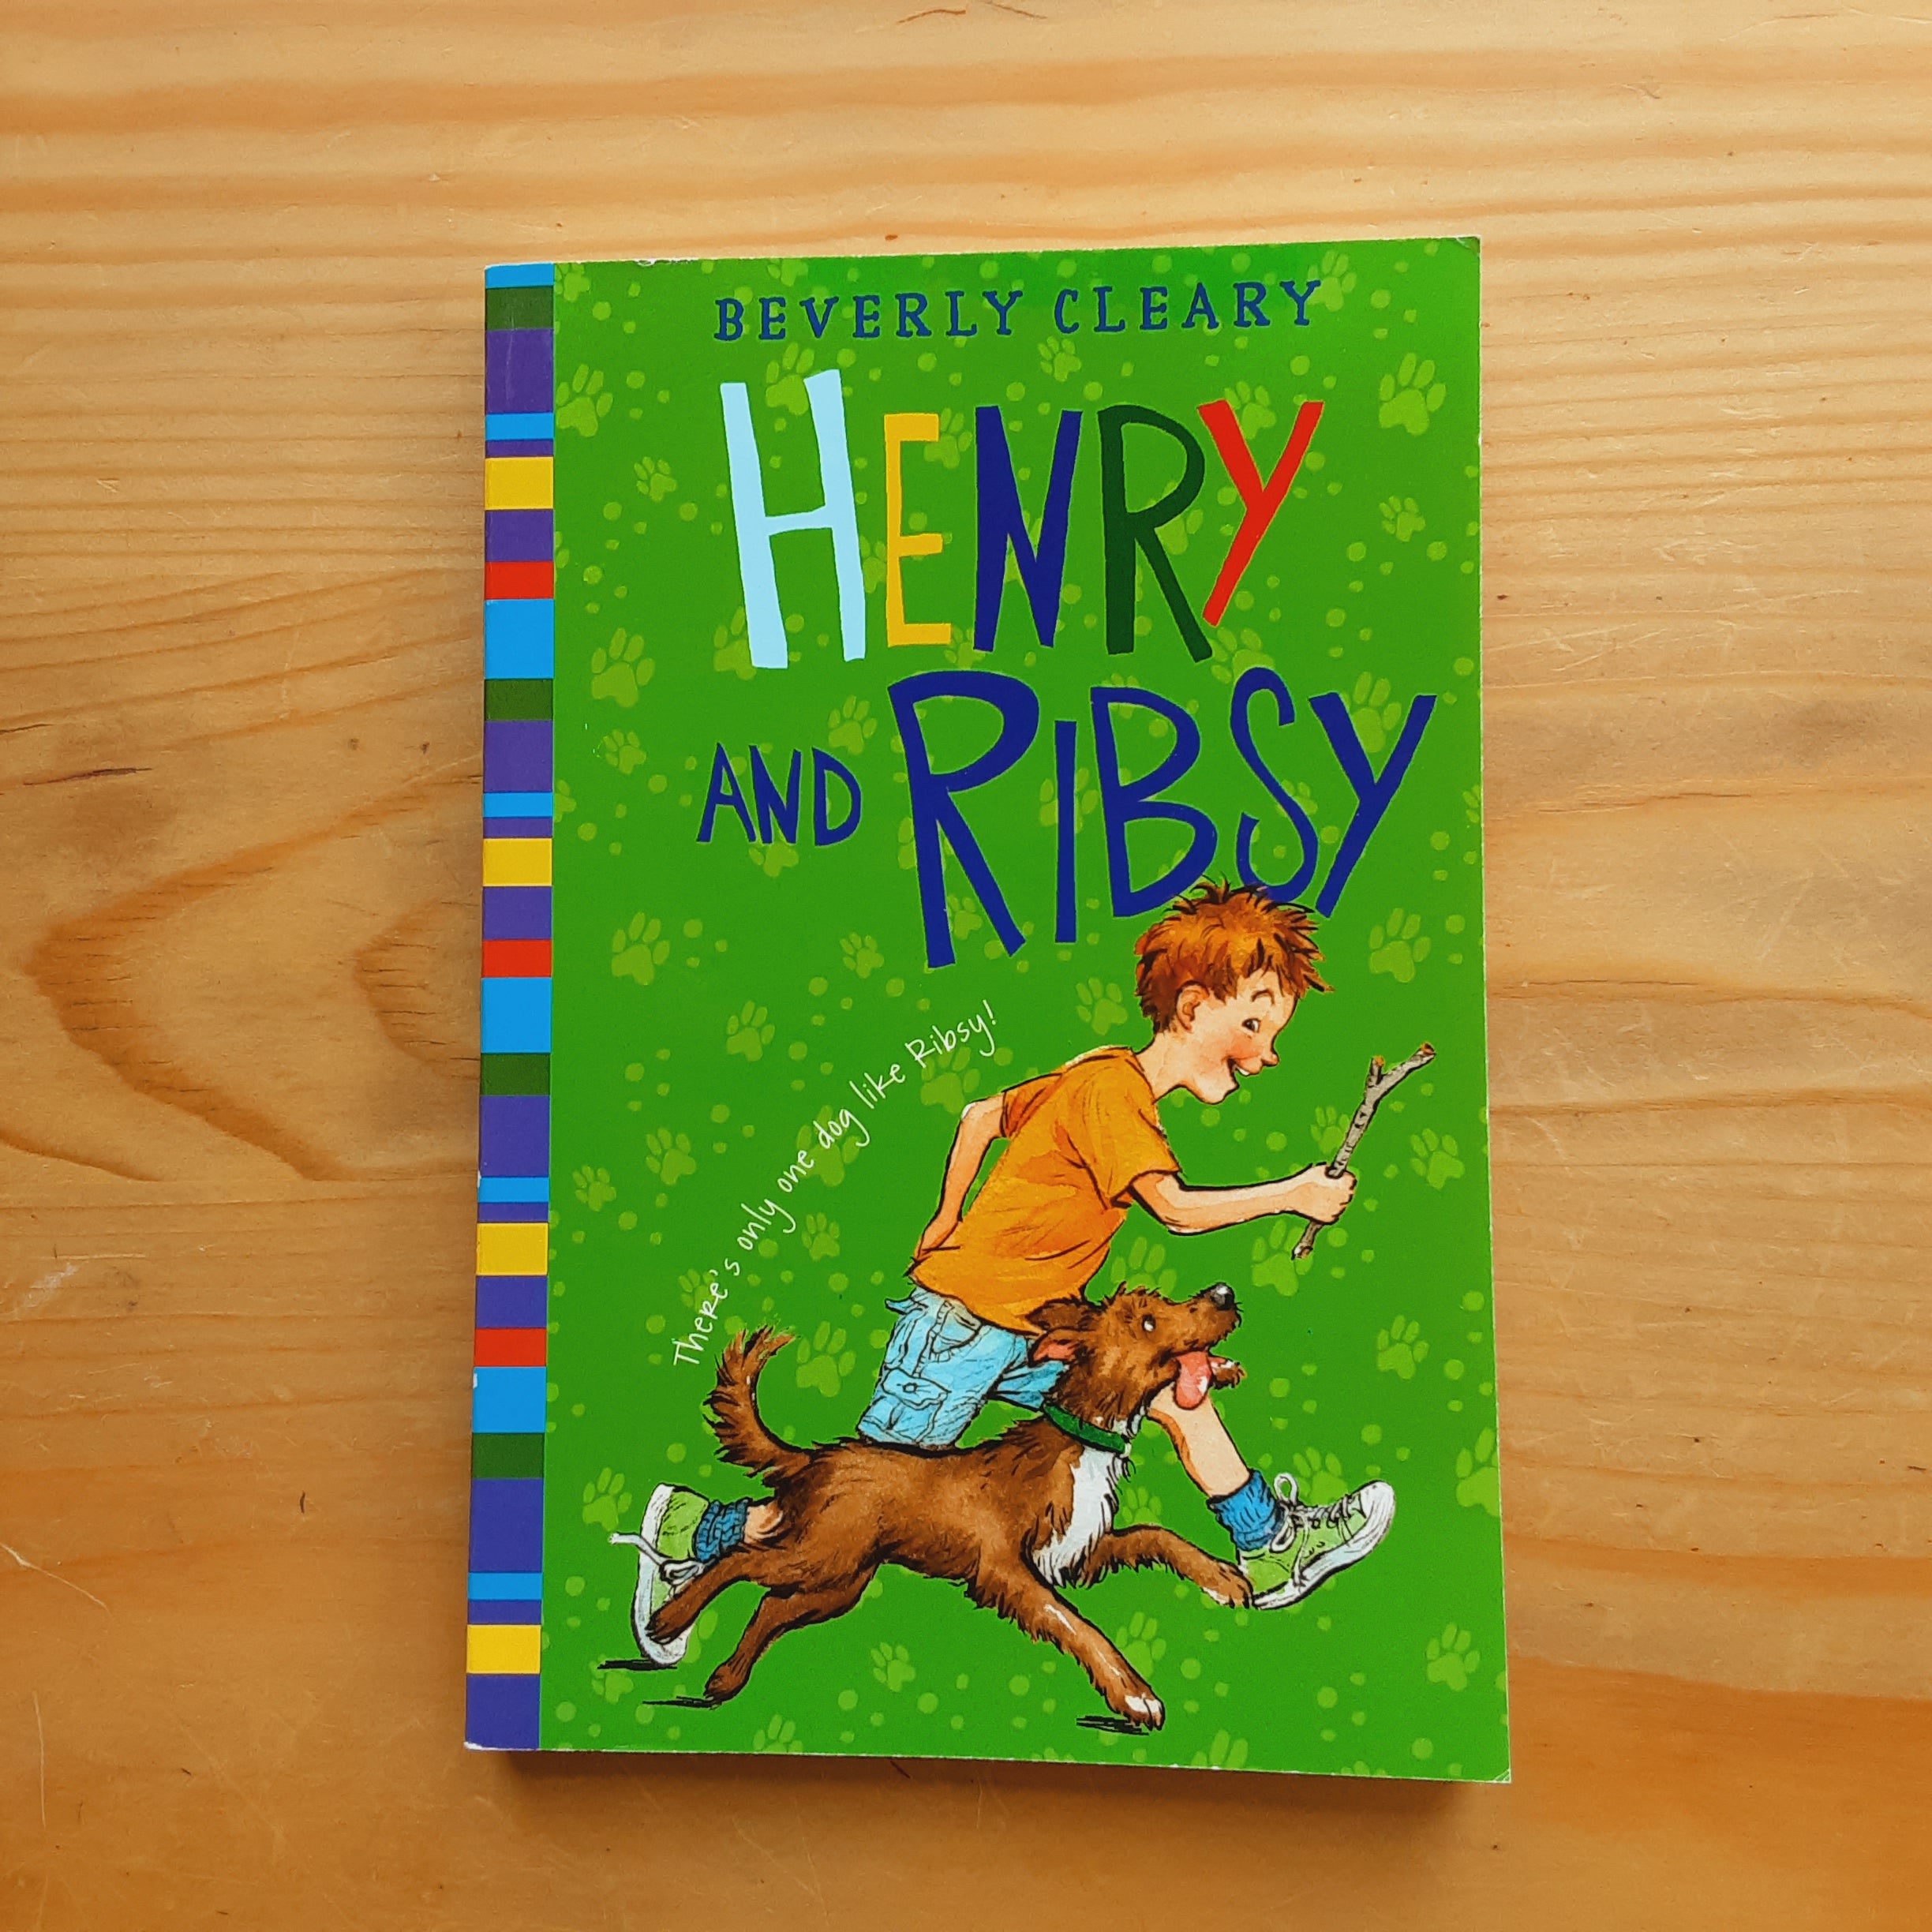 Henry and Ribsy by Beverly Cleary – Childhood Ink